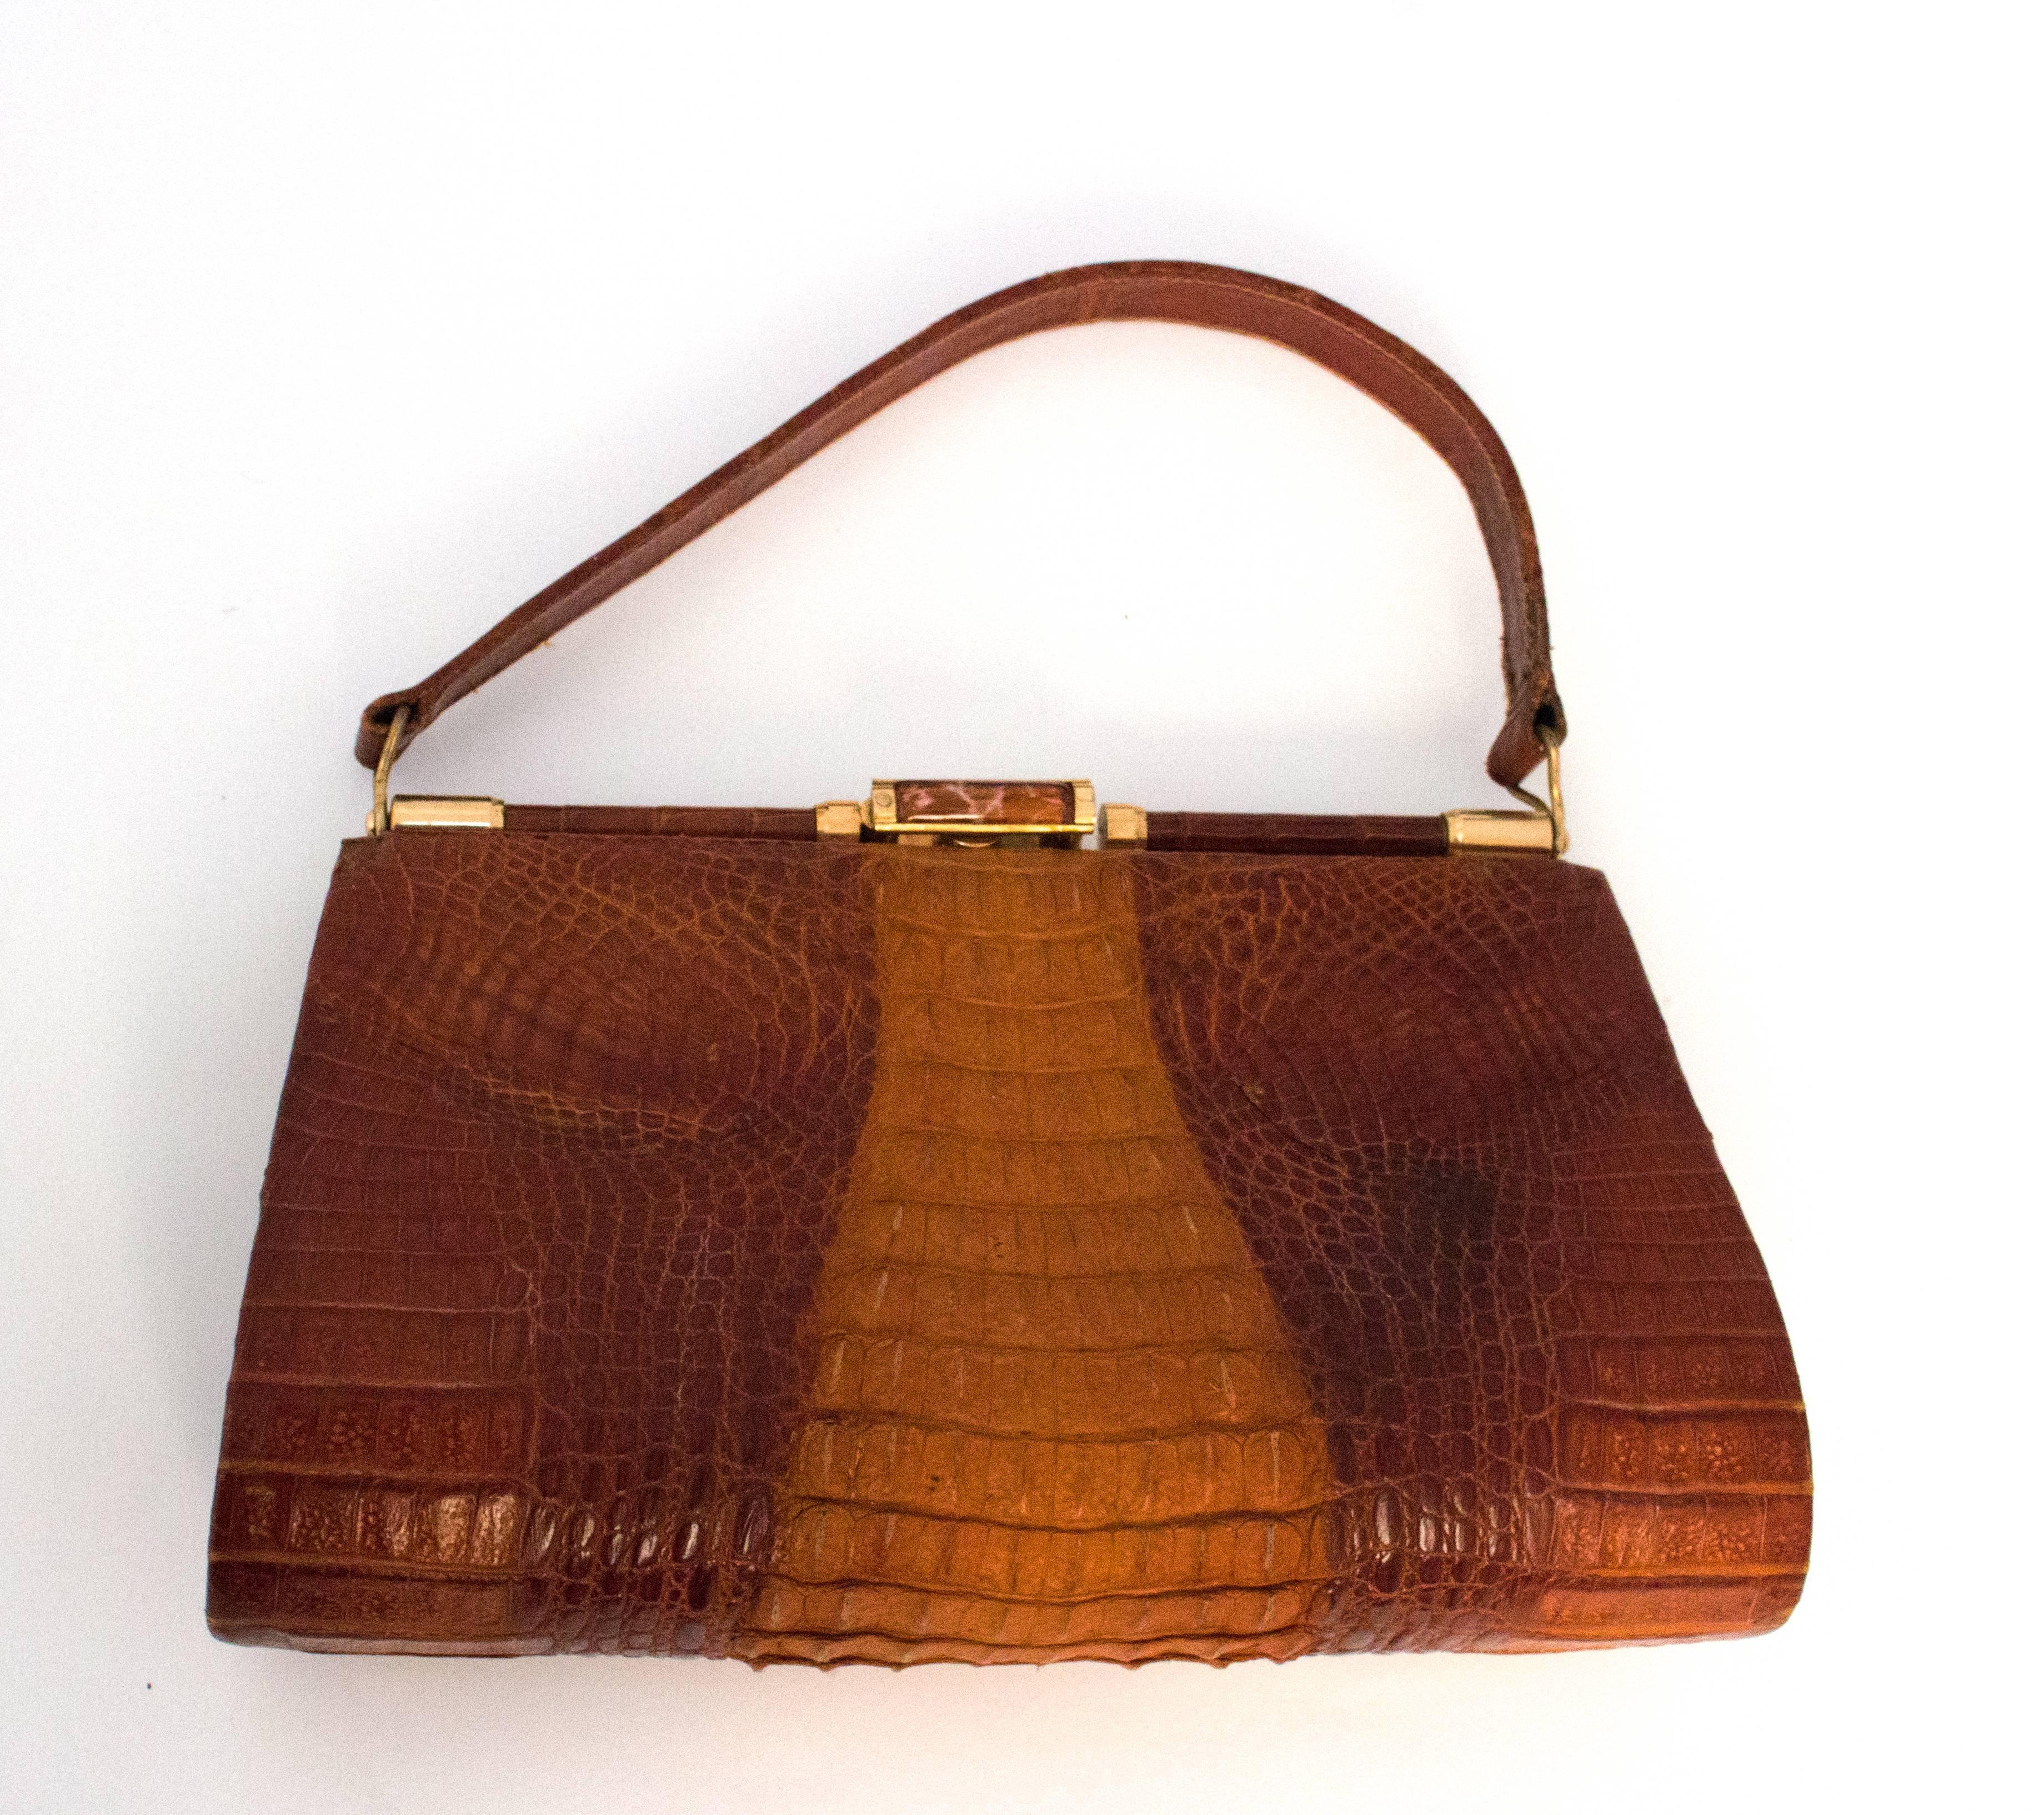 50s hornback alligator handbag. Small art glass detail on frame lock. Three interior pockets, one is zippered. 

Measurements
Width: 9 1/4 - 10 1/2 inches
Height: 16 inches
Handle: 13 1/4 inches 
